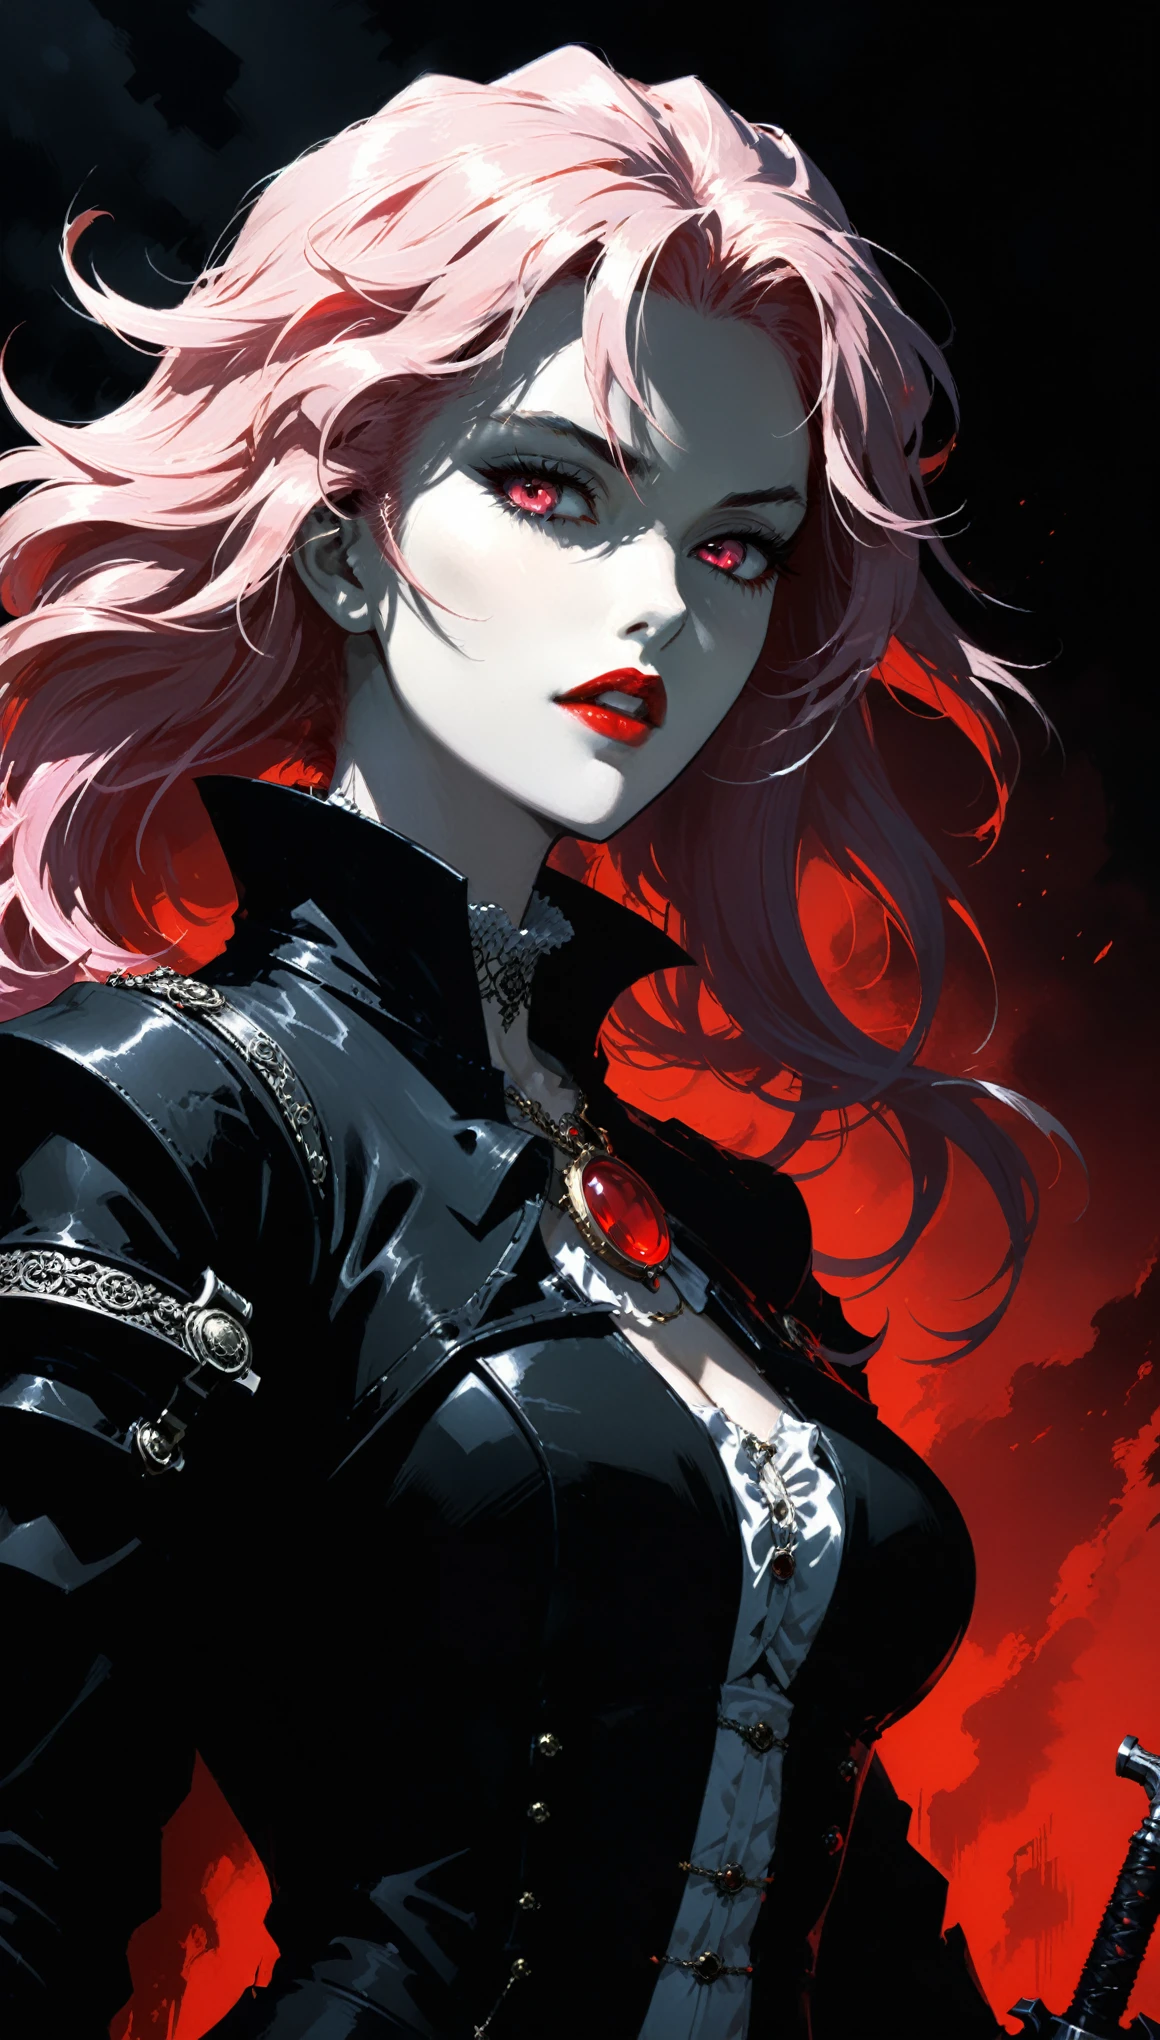 in style of Ashley Wood,
(2d comic style:1.3),(1990s \(style\):1.3),(vampire hunter D style:1.2),charlotte, an aristocratic maiden closeup,vivid colors,(dynamic action:1.2),
BREAK
(Rose Quartz:1.3),(the red crescent moon background:1.4),sharp,sharp image,(insanely detailed and intricate, hypermaximalist, elegant, ornate, hyper realistic, super detailed:1.1),extremely detailed,Amazing resolution,8k,(Ray Tracing:1.3),masterpiece,(Particle Effects:1.3),(Beautiful Effects:1.3),
BREAK
(darkness:1.4),(extreme shadows:1.4),(Best Shadow:1.4),dark atmosphere,